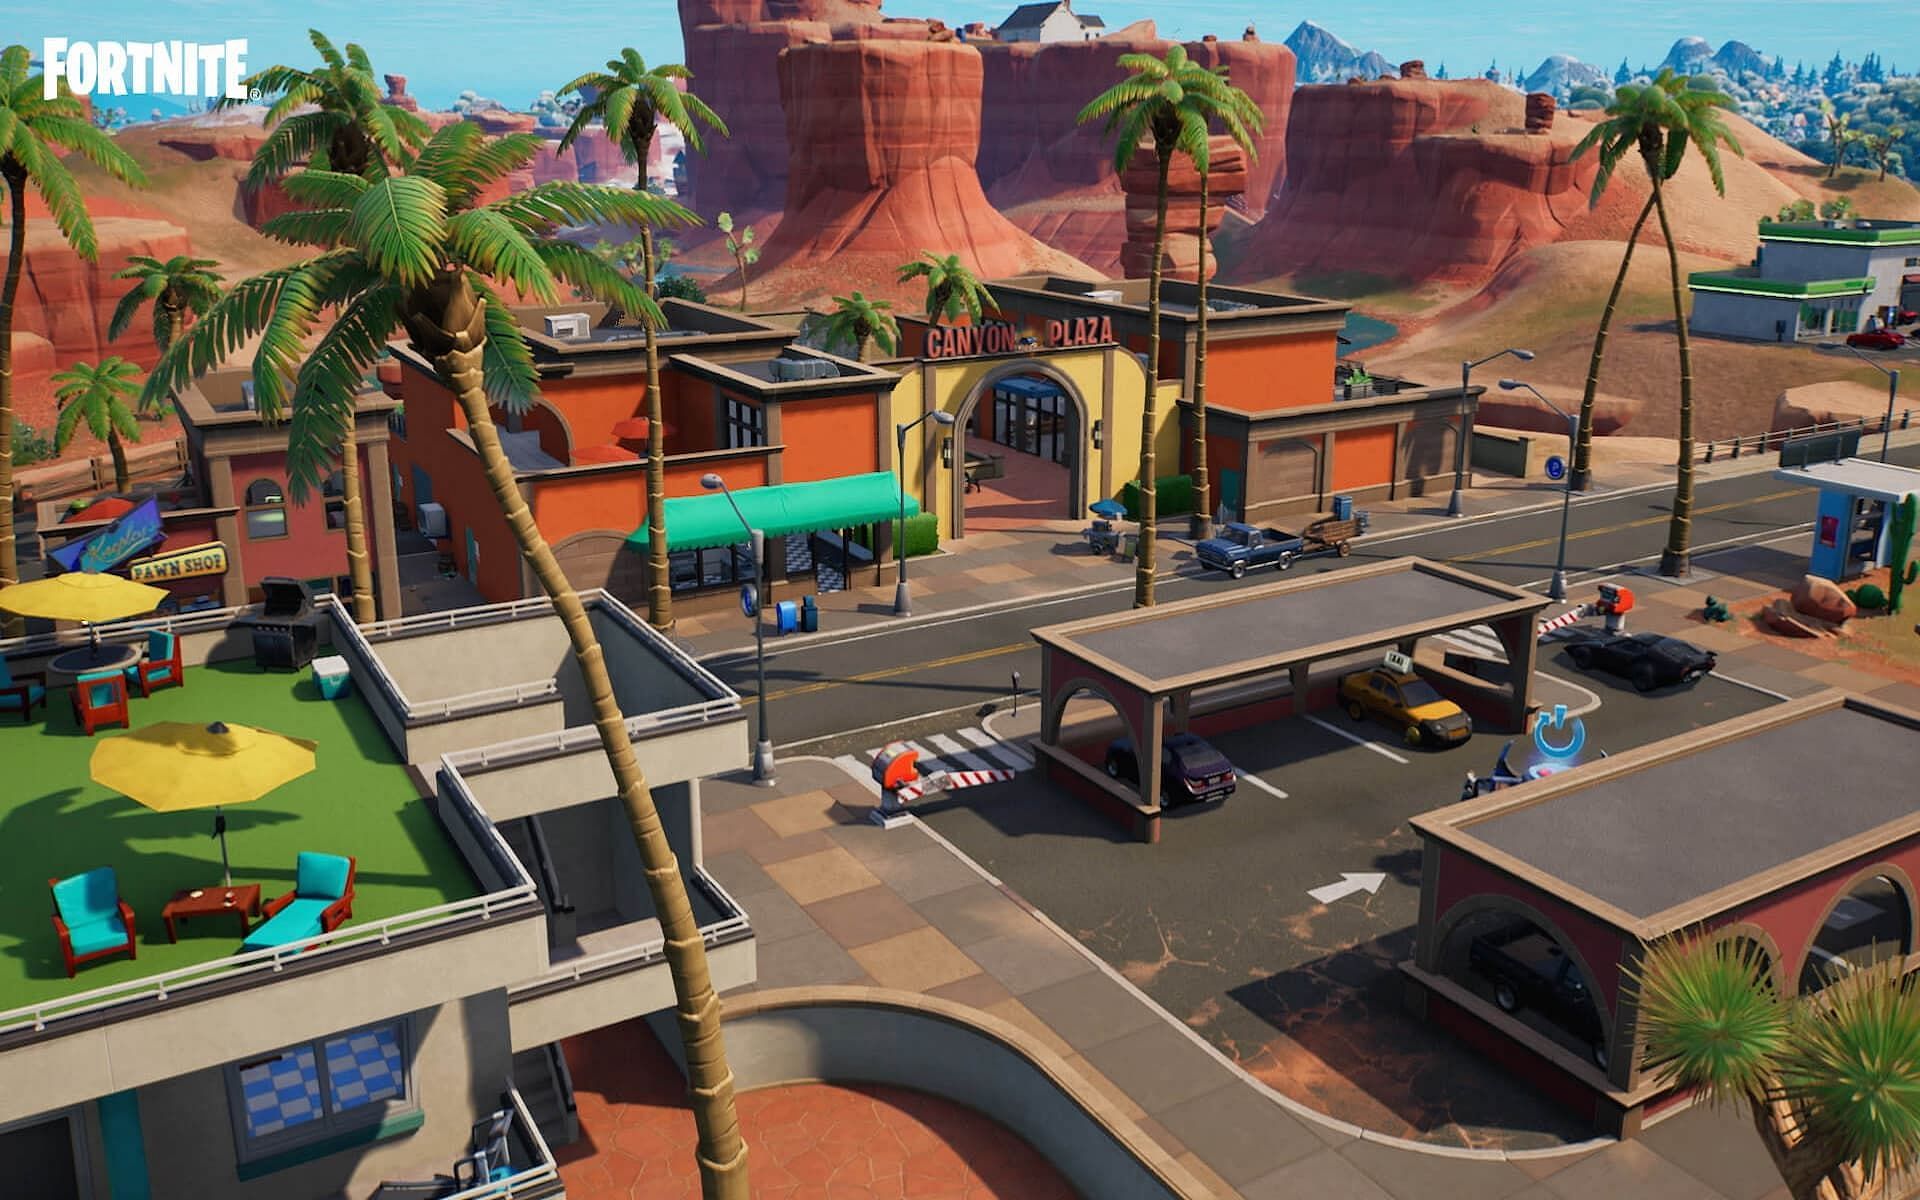 A look at Condo Canyon in Fortnite Chapter 3 Season 2 (Image via Epic Games)